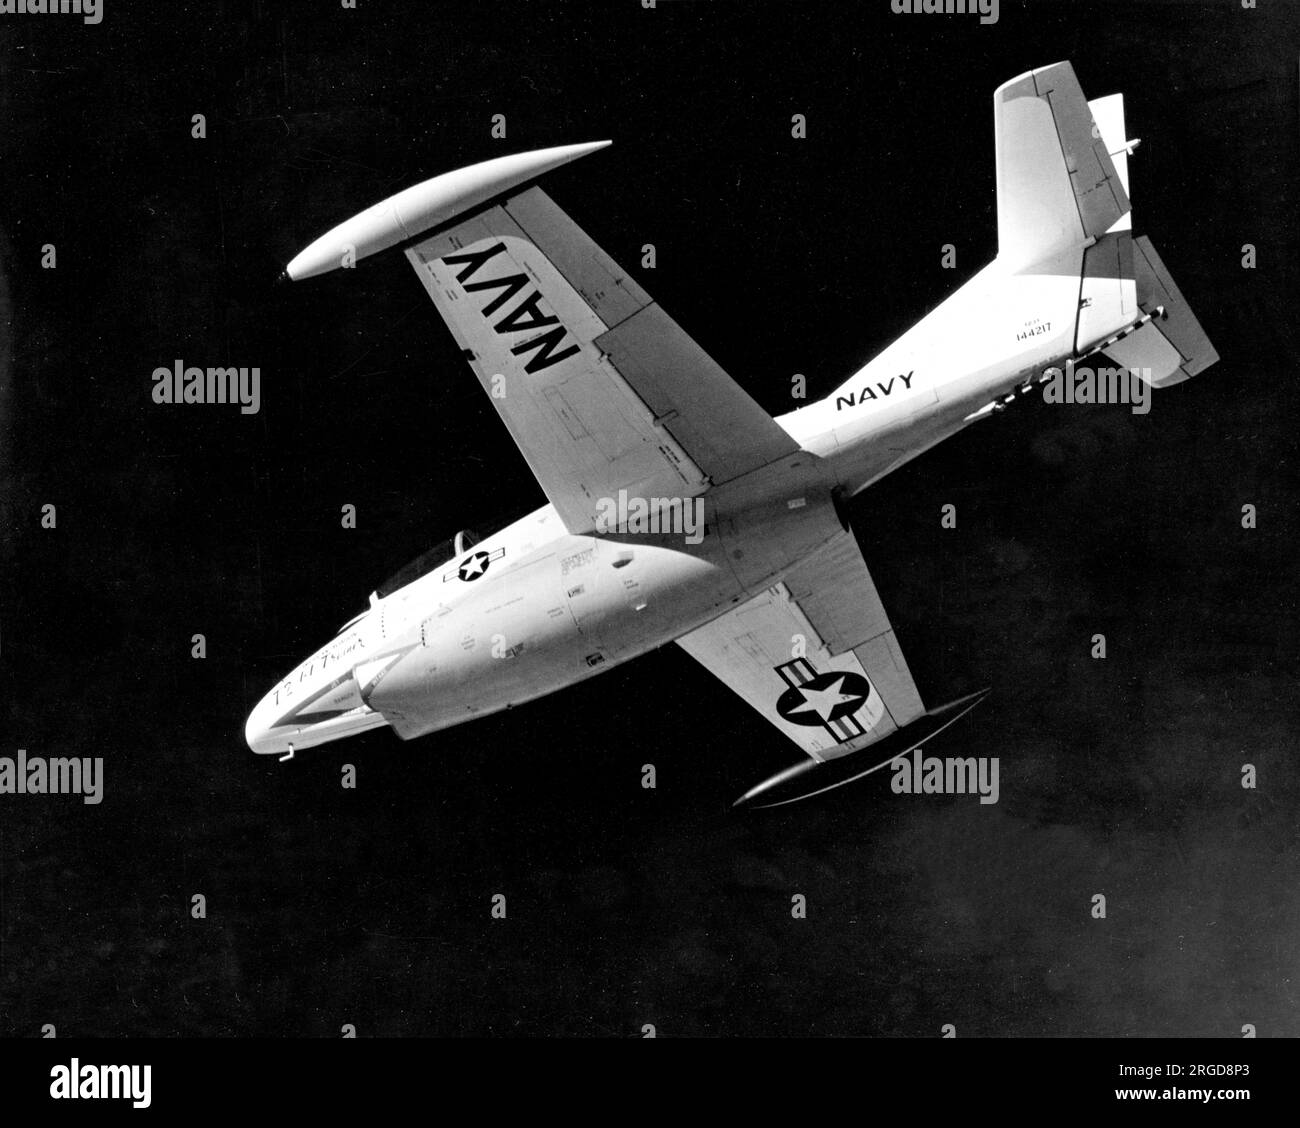 United States Navy - North American YT2J-1 Buckeye 144217 (249-1), the first YT2J-1 (later redesignated YT-2A). Stock Photo